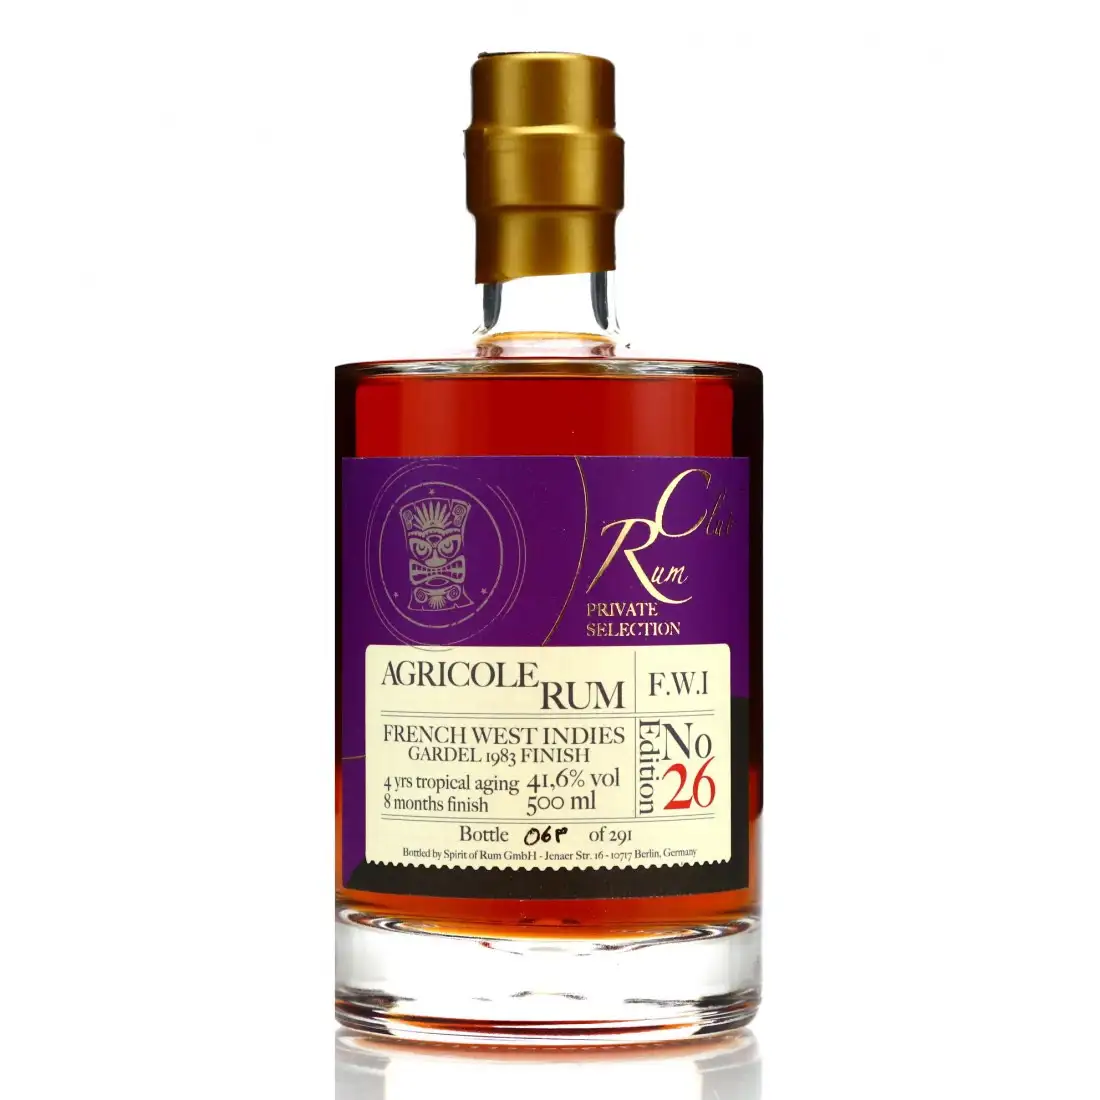 Image of the front of the bottle of the rum Rumclub Private Selection Ed. 26 Agricole Rum F.W.I (Ex-Gardel Finish)